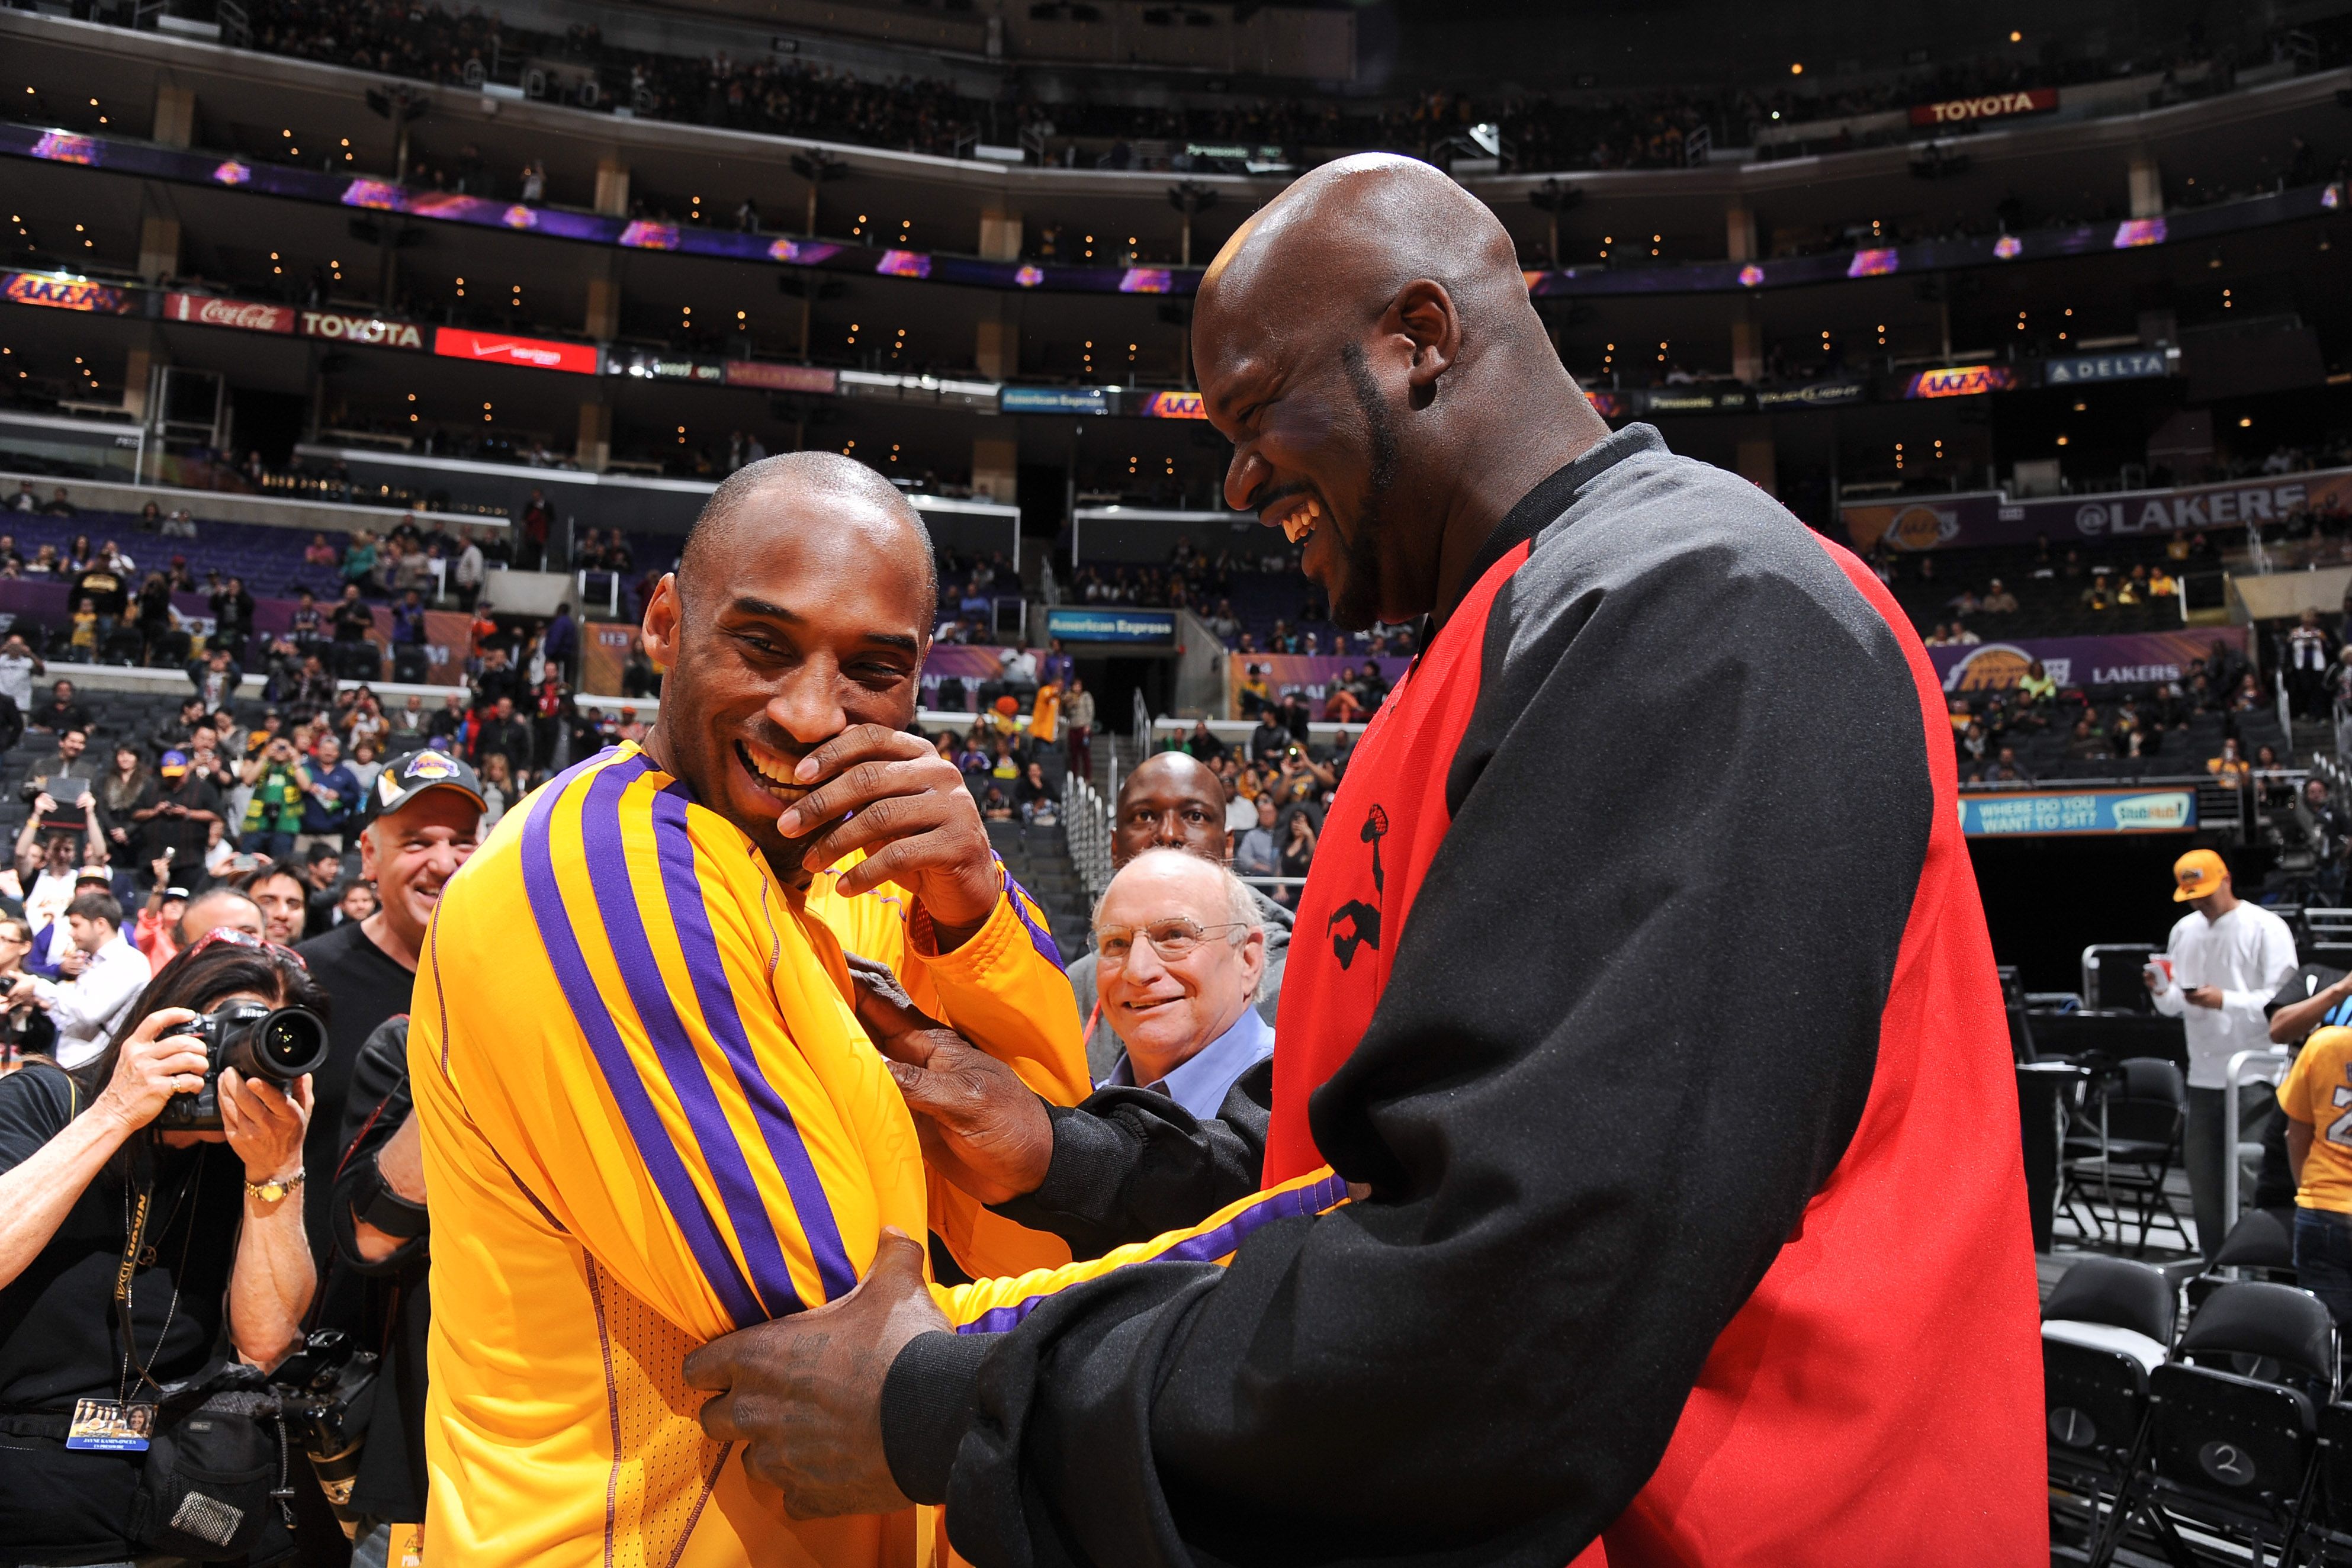 Shaquille O'Neal with former teammate Kobe Bryant #24 of the Los Angeles Lakers at Staples Center in February 2013 in Los Angeles, California | Source: Getty Images